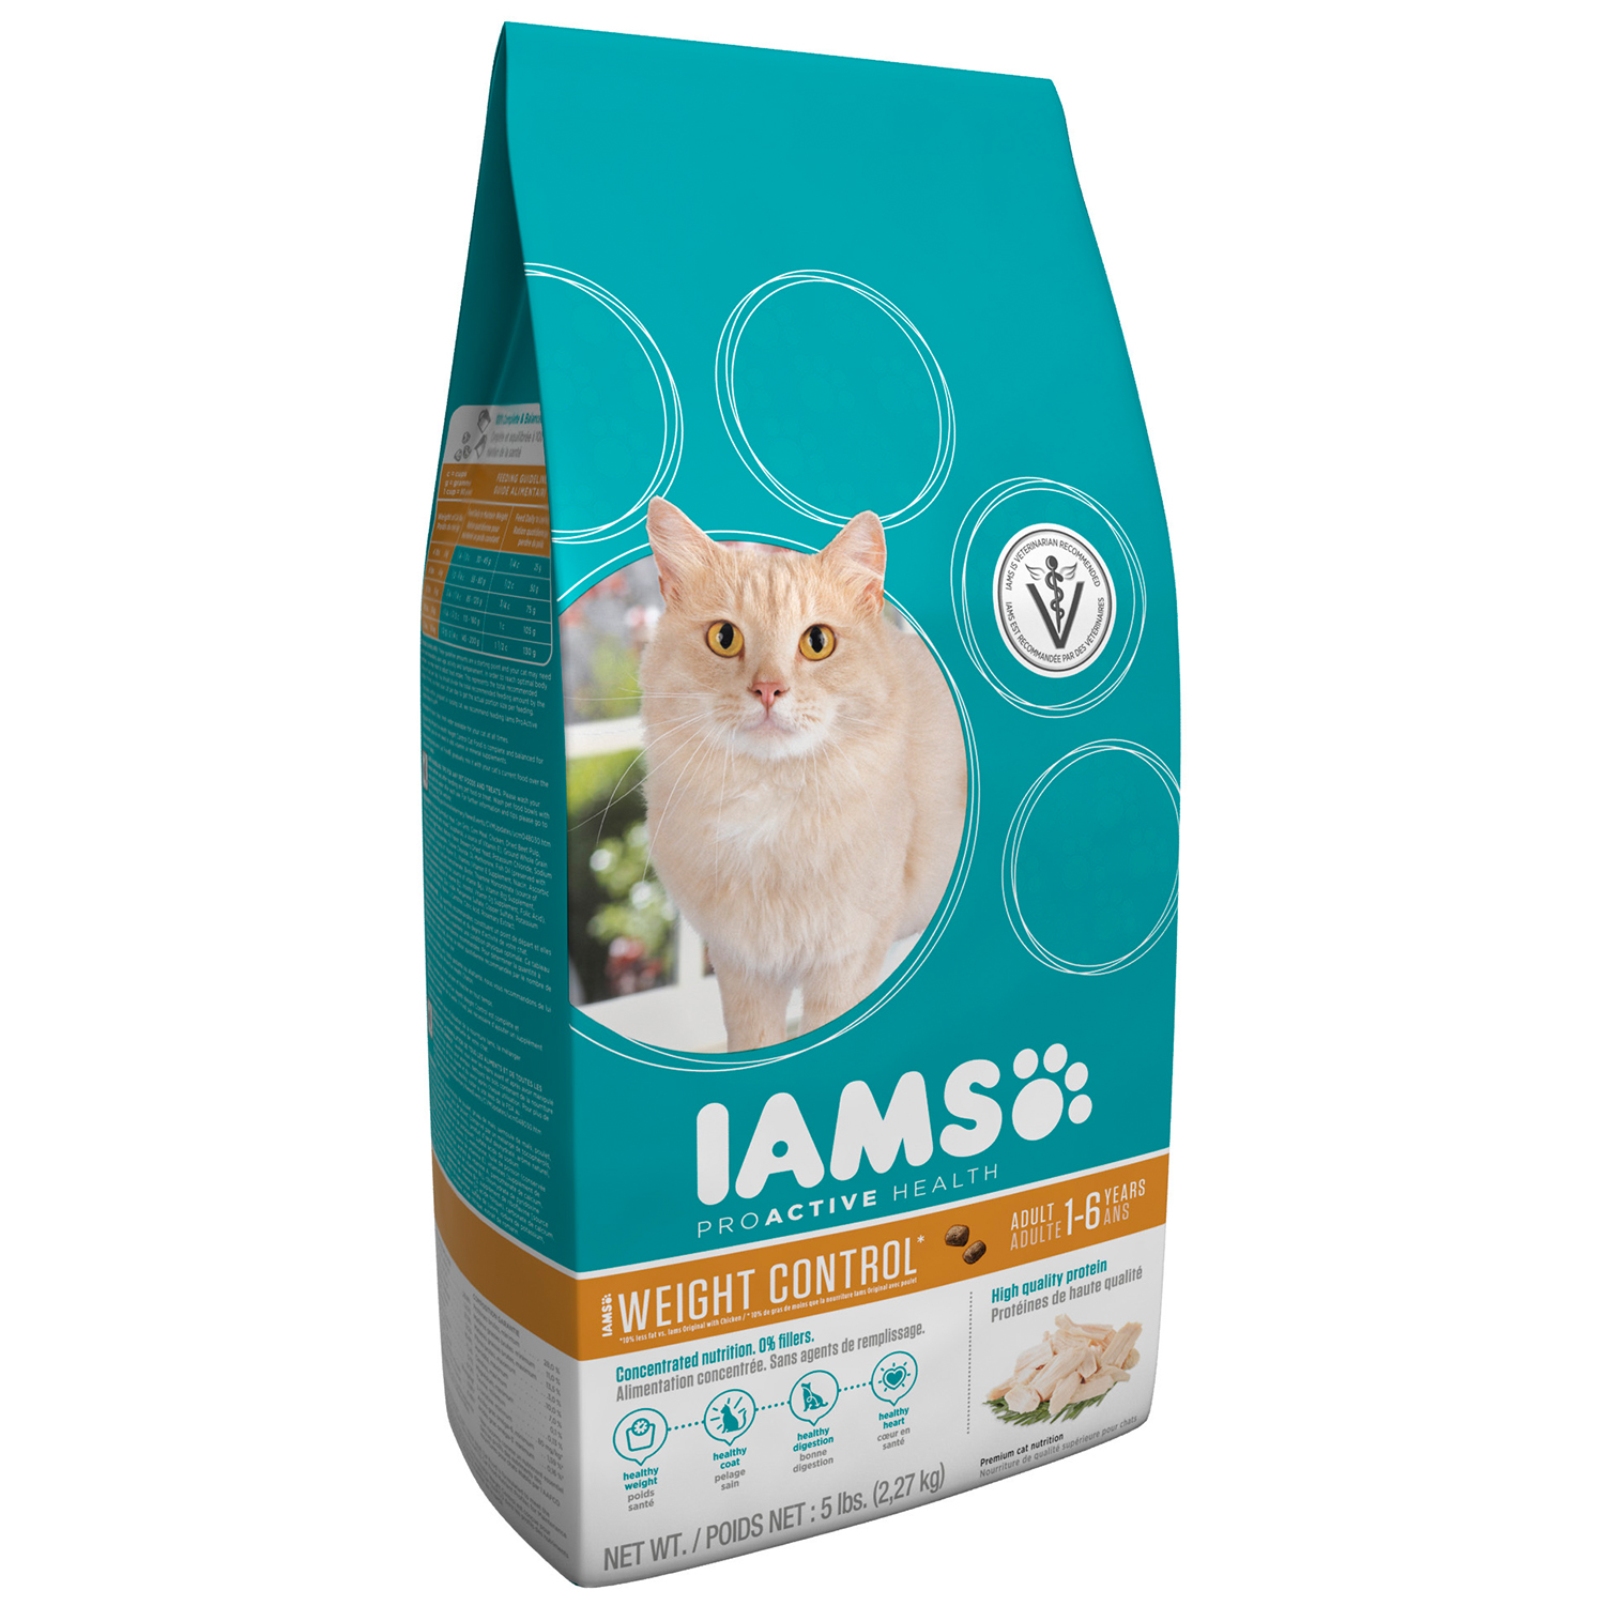 Iams Cat Food, ProActive Health Adult Weight Control Dry, 5 lb